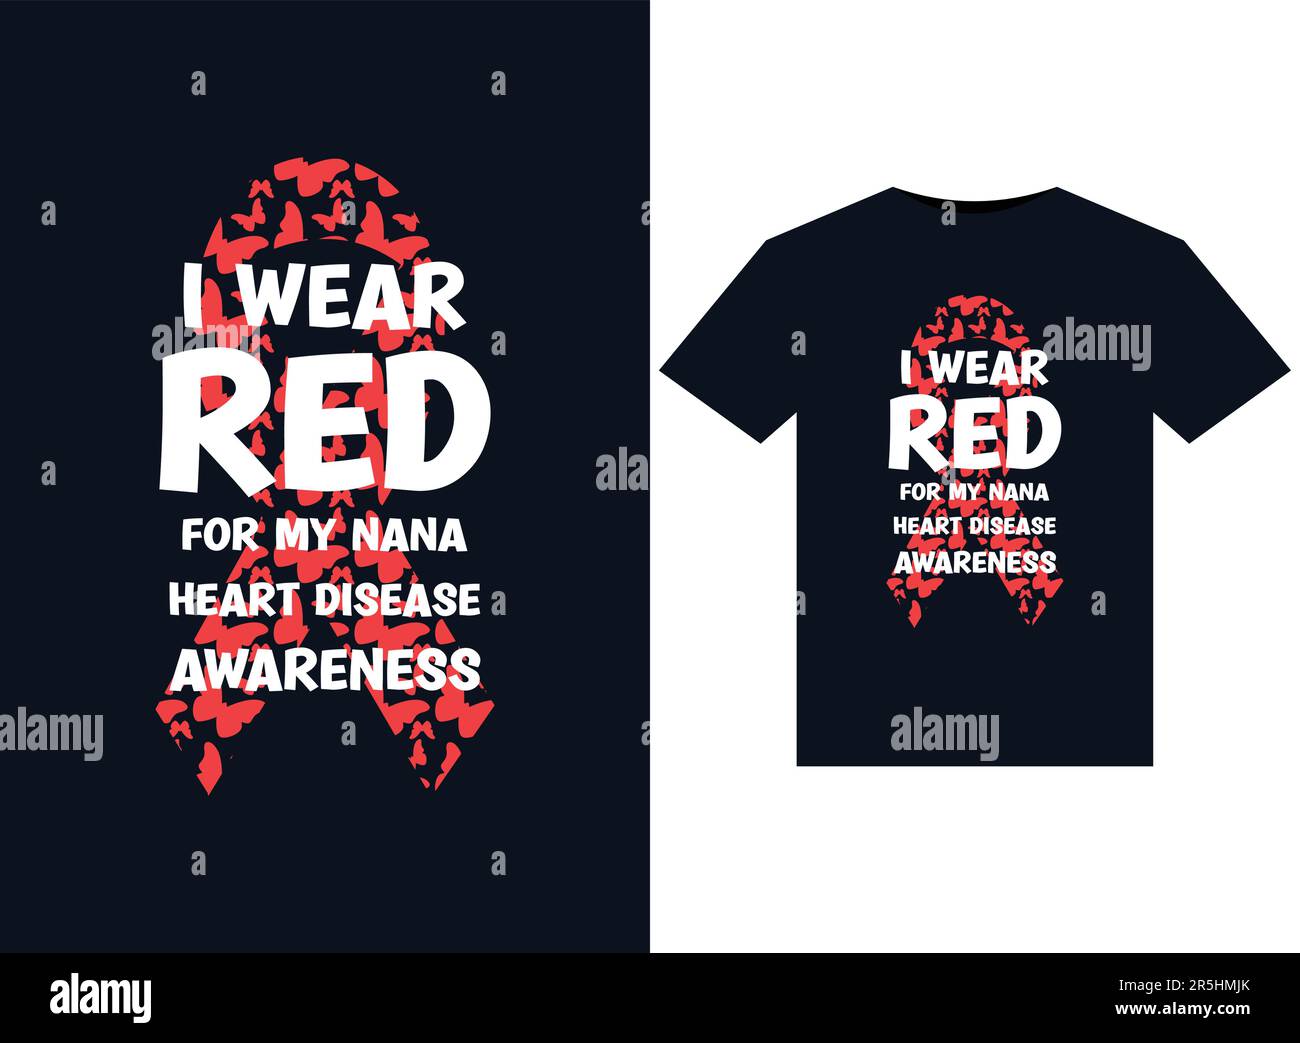 I Wear Red For My Nana Heart Disease Awareness illustrations for print-ready T-Shirts design. Stock Vector